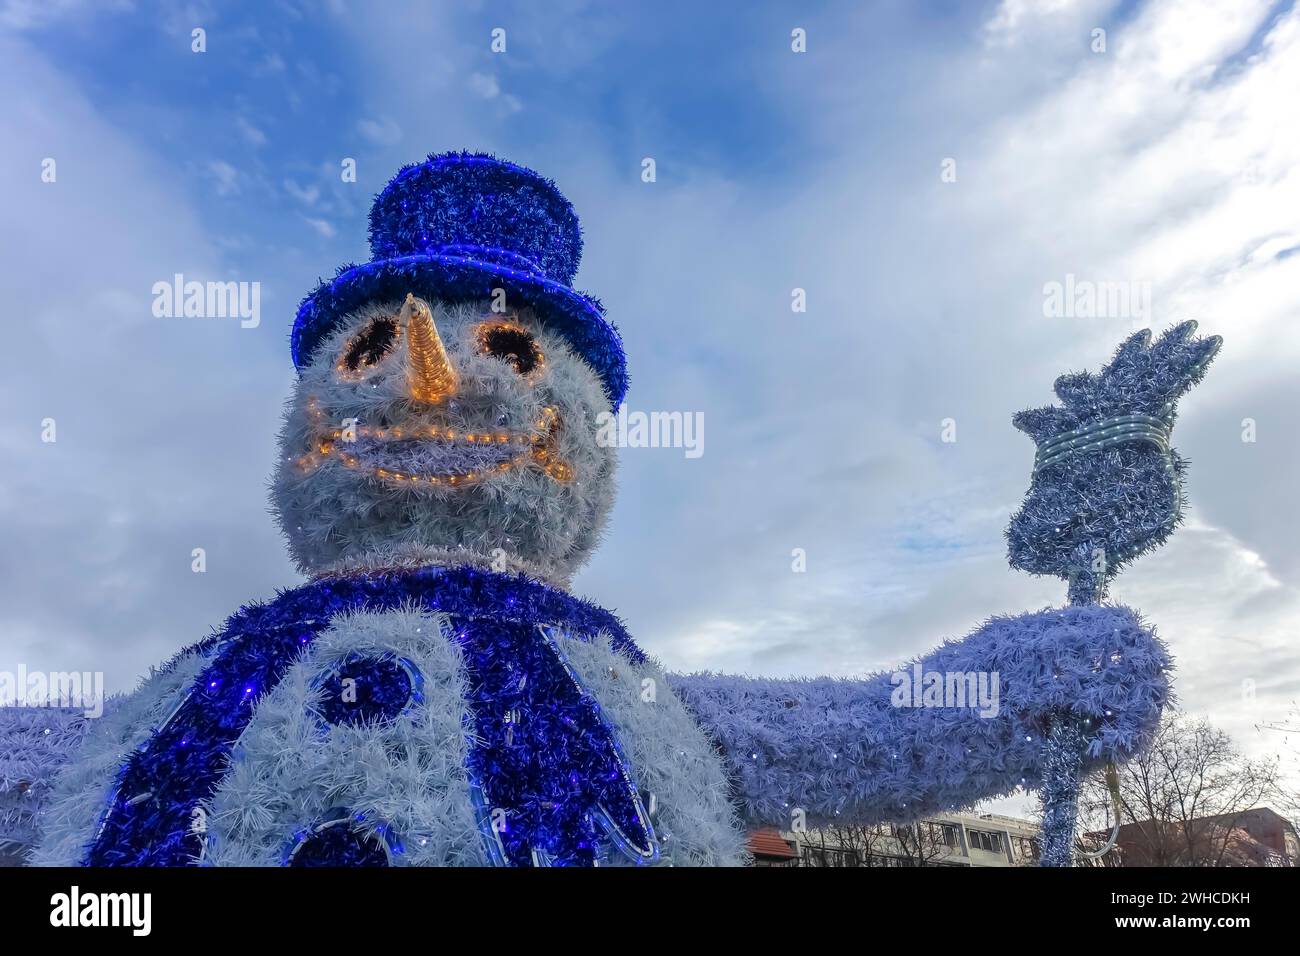 Snowman with hat, carrot nose, broom, top hat, scarf, illuminated figurine, mouth, eyes, funny winter motif, Christmas motif, Christmas, Christfest Stock Photo